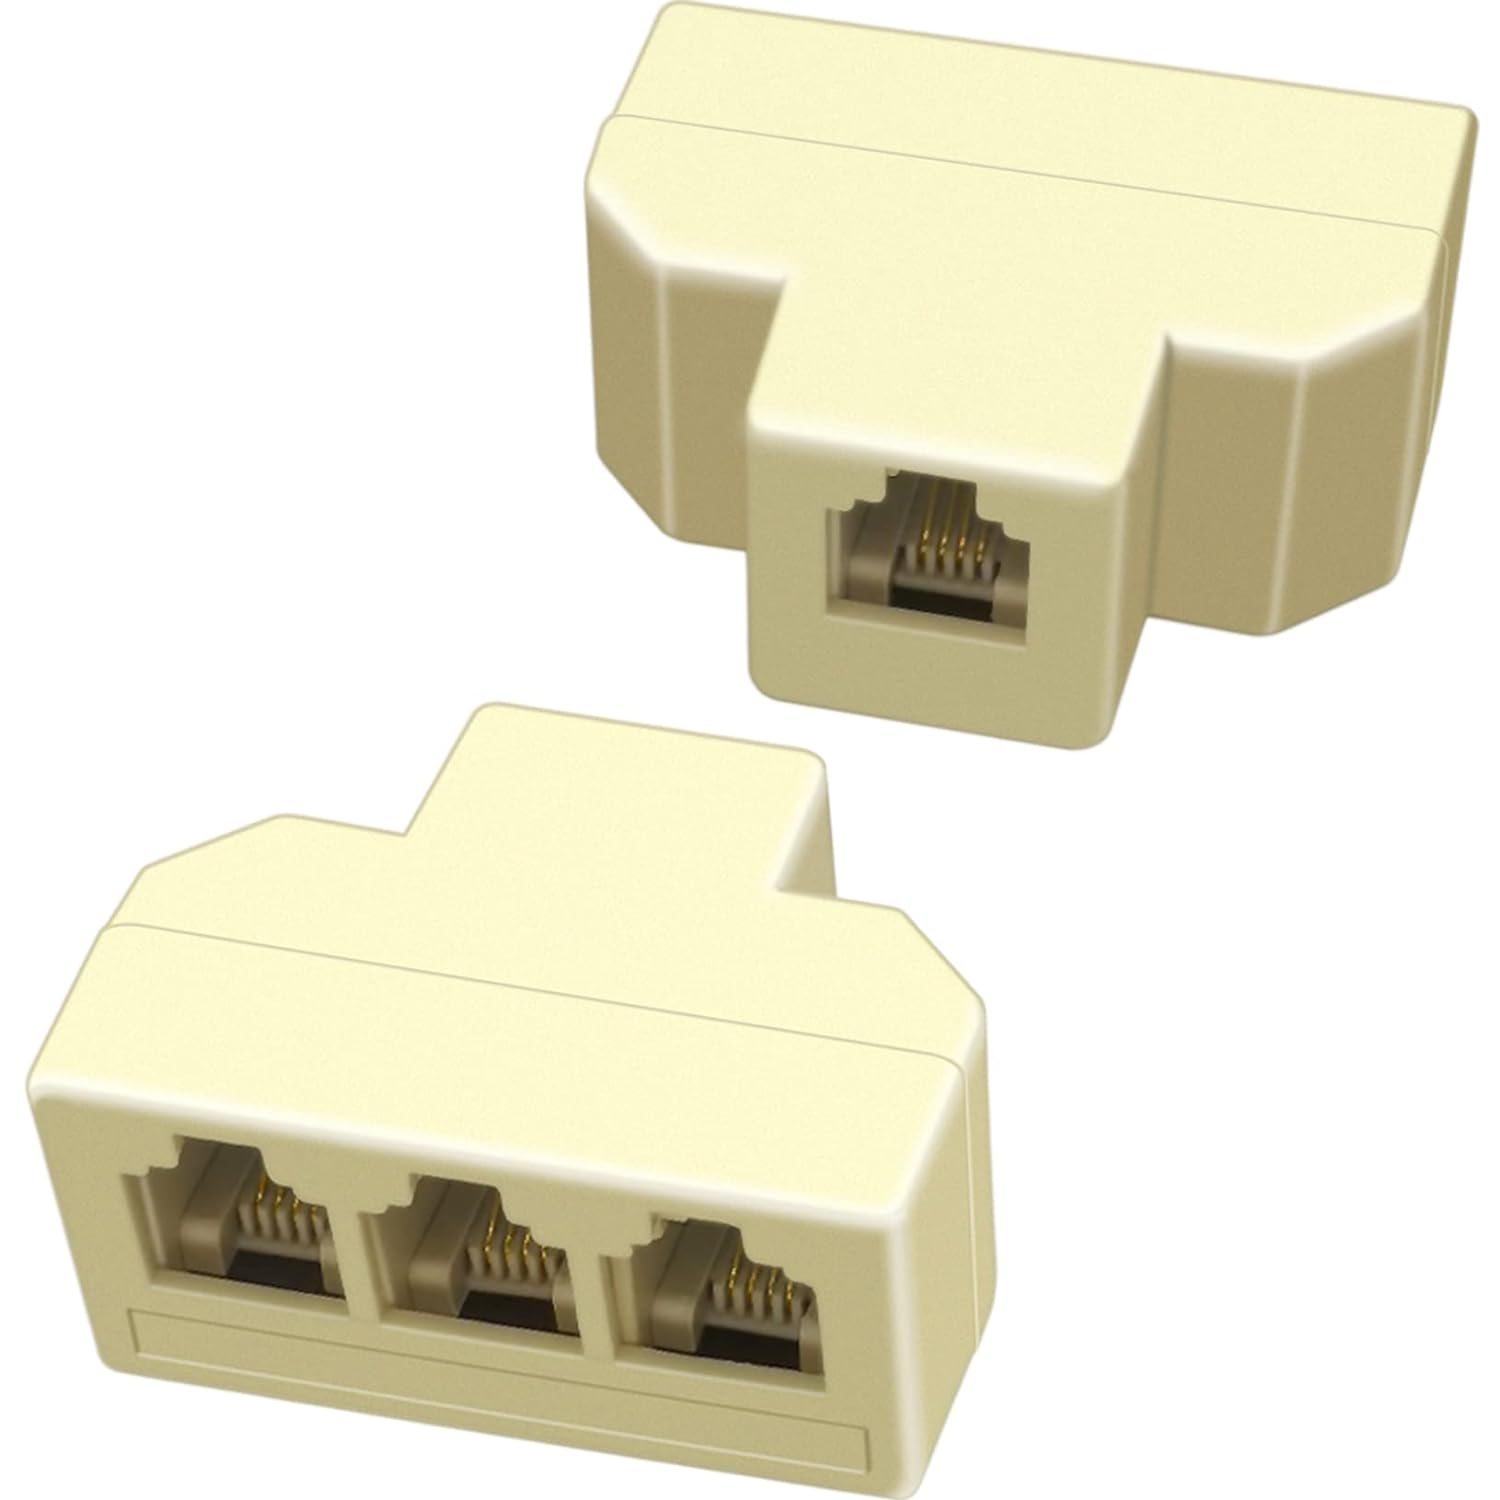 Great Choice Products 2Pack Phone Splitter 3 Way Telephone Adapter Rj11 6P4C 1 Female To 3 Females For Landline And Fax Ivory